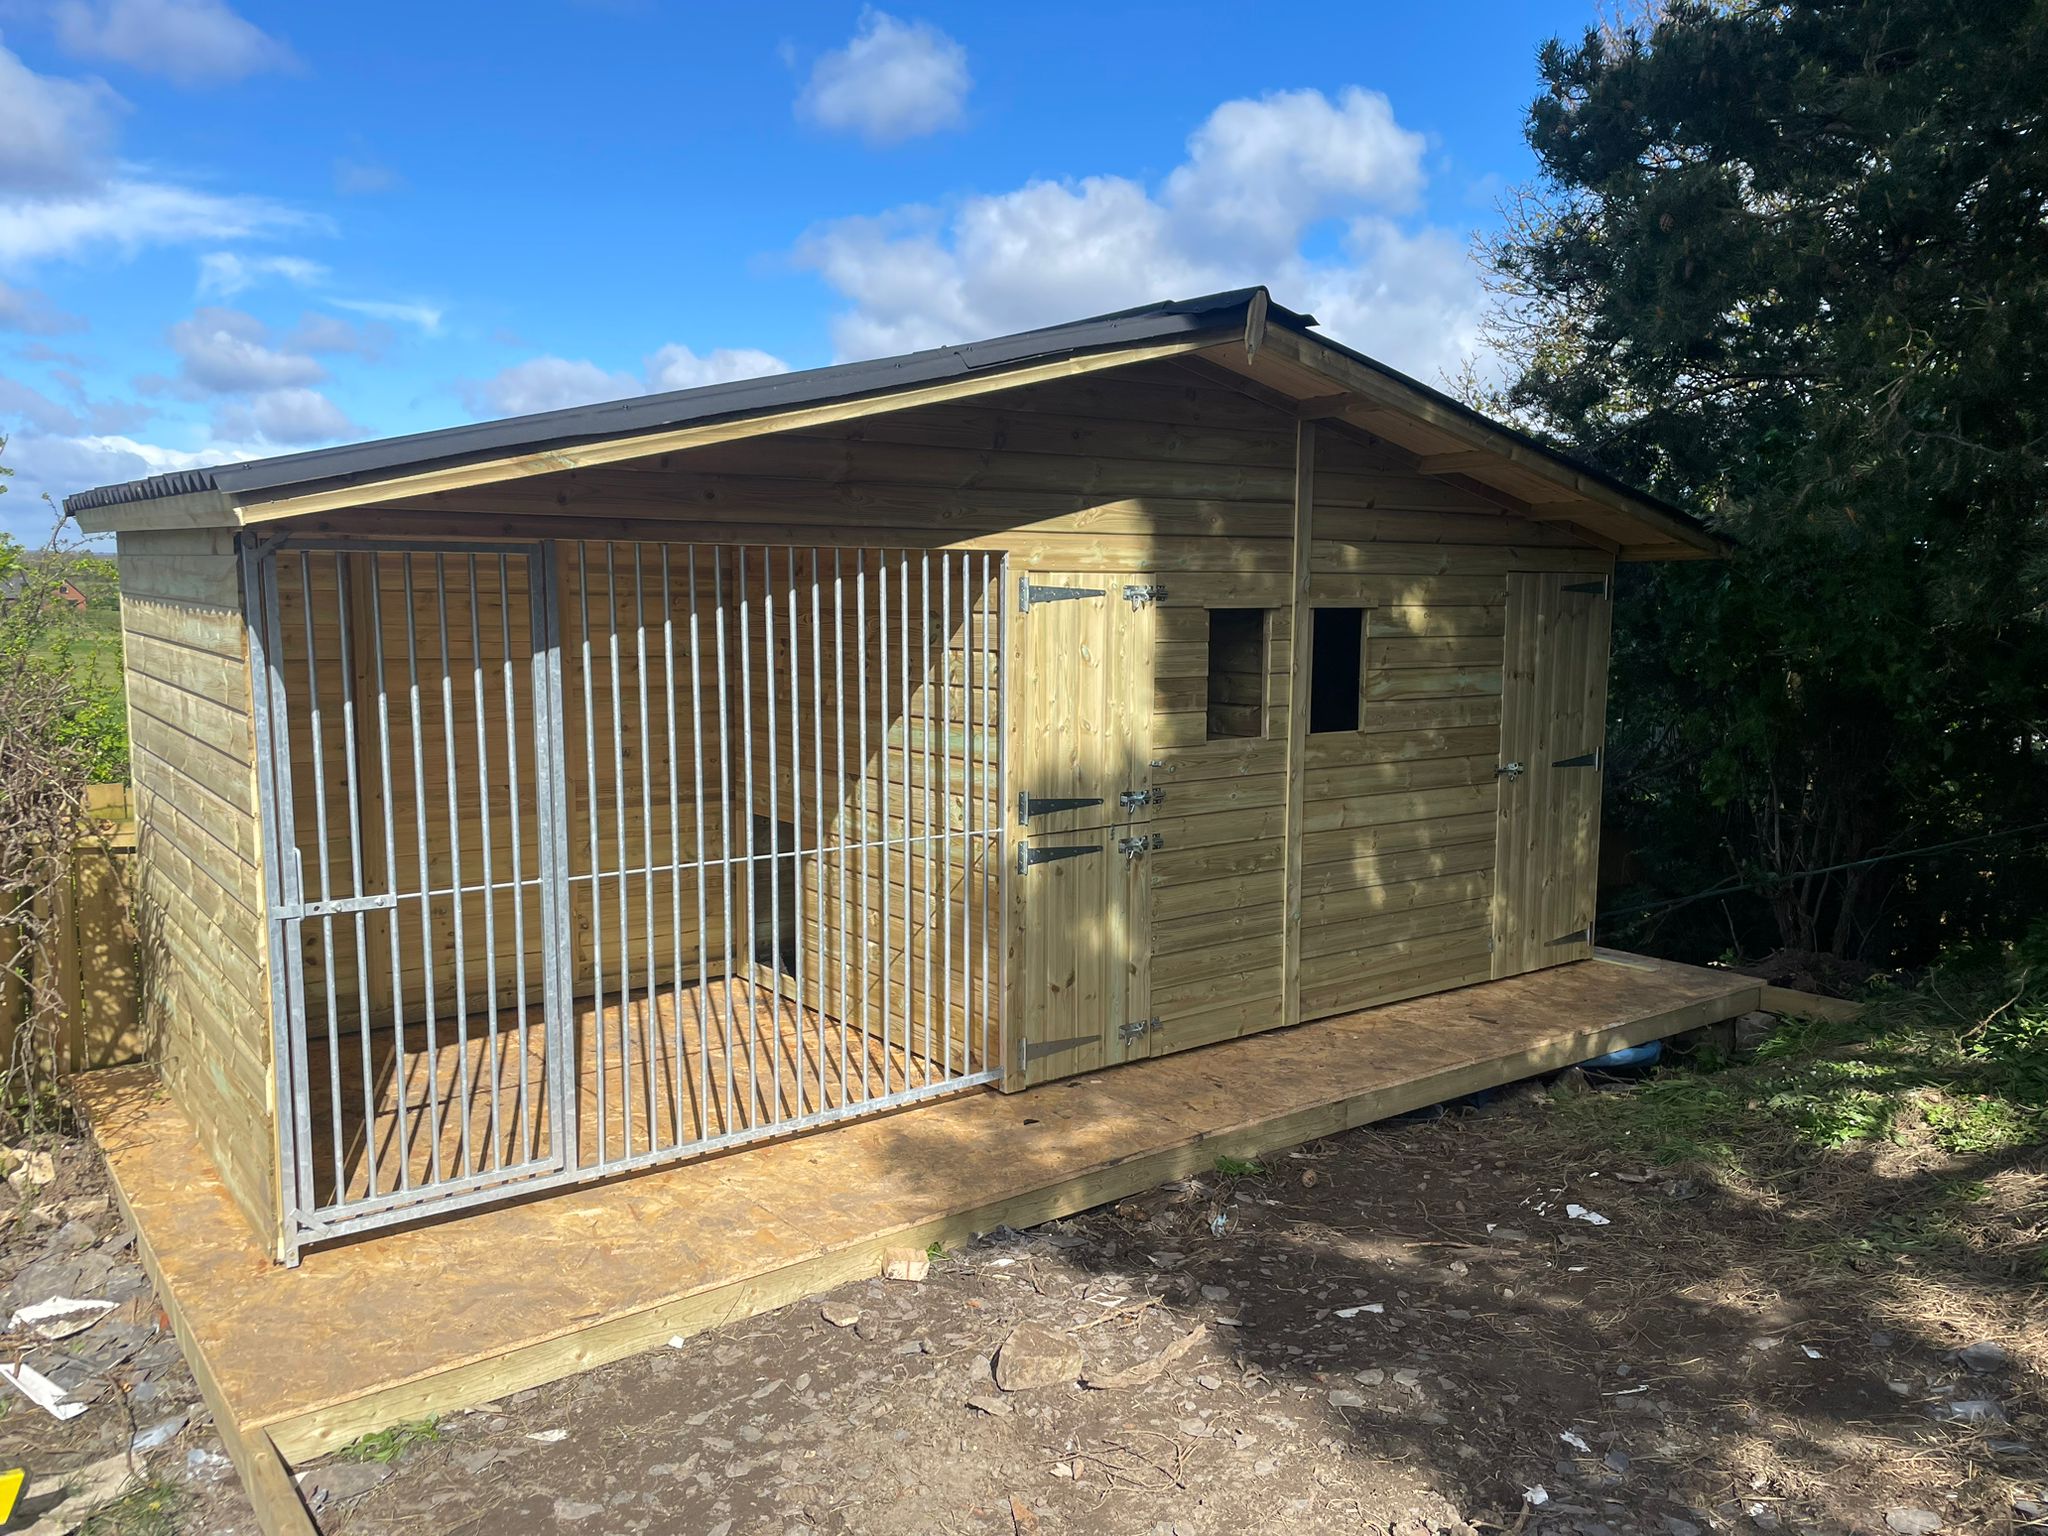 Elworth Wooden Dog Kennel And Run With Storage Shed 17ft (wide) x 6ft (depth) x 7ft (apex)